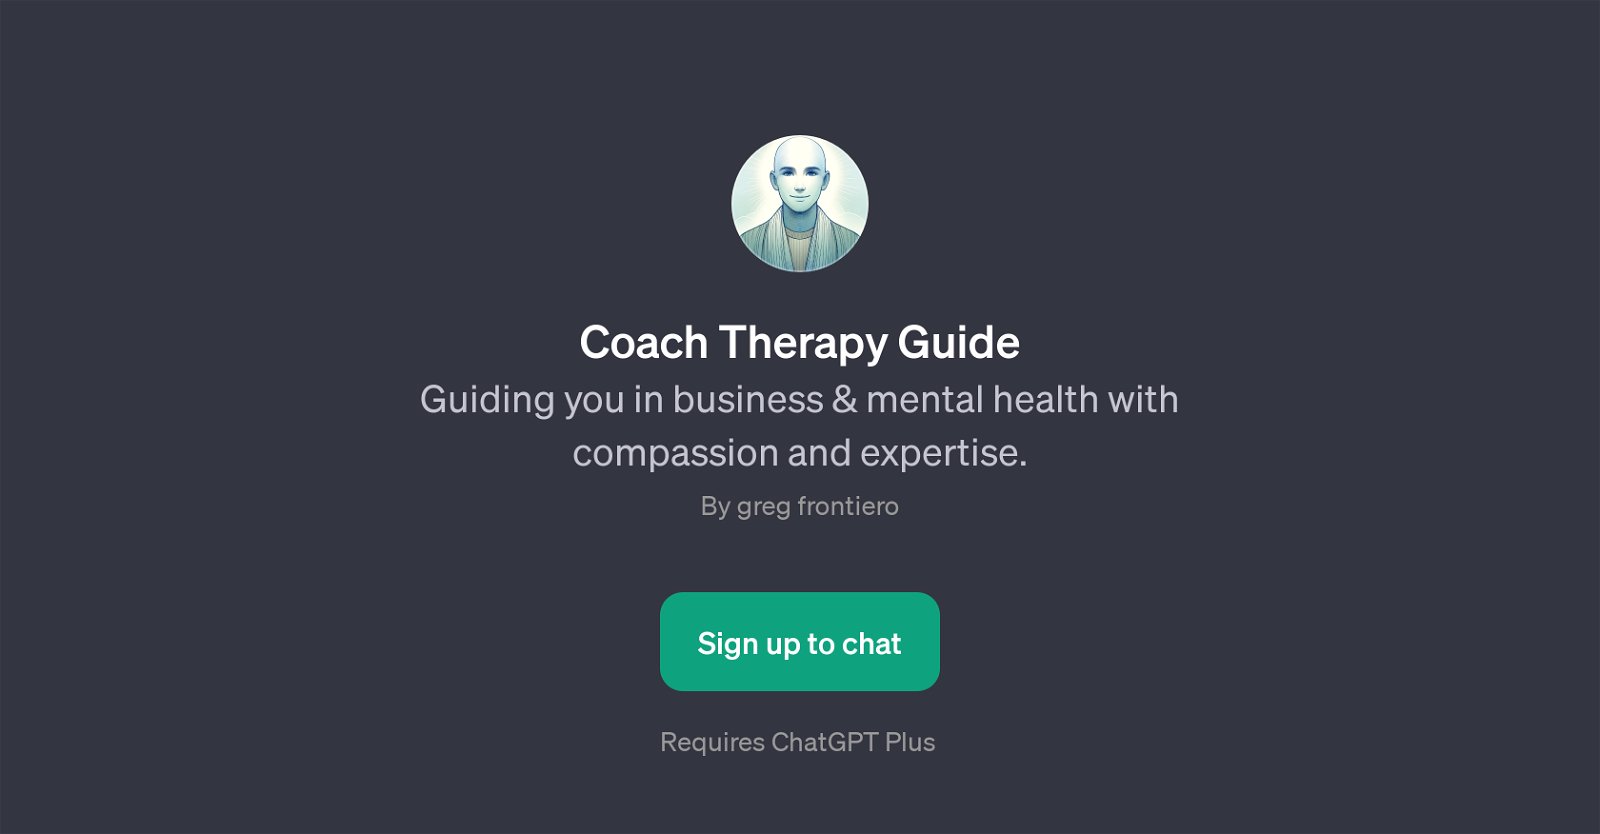 Coach Therapy Guide website